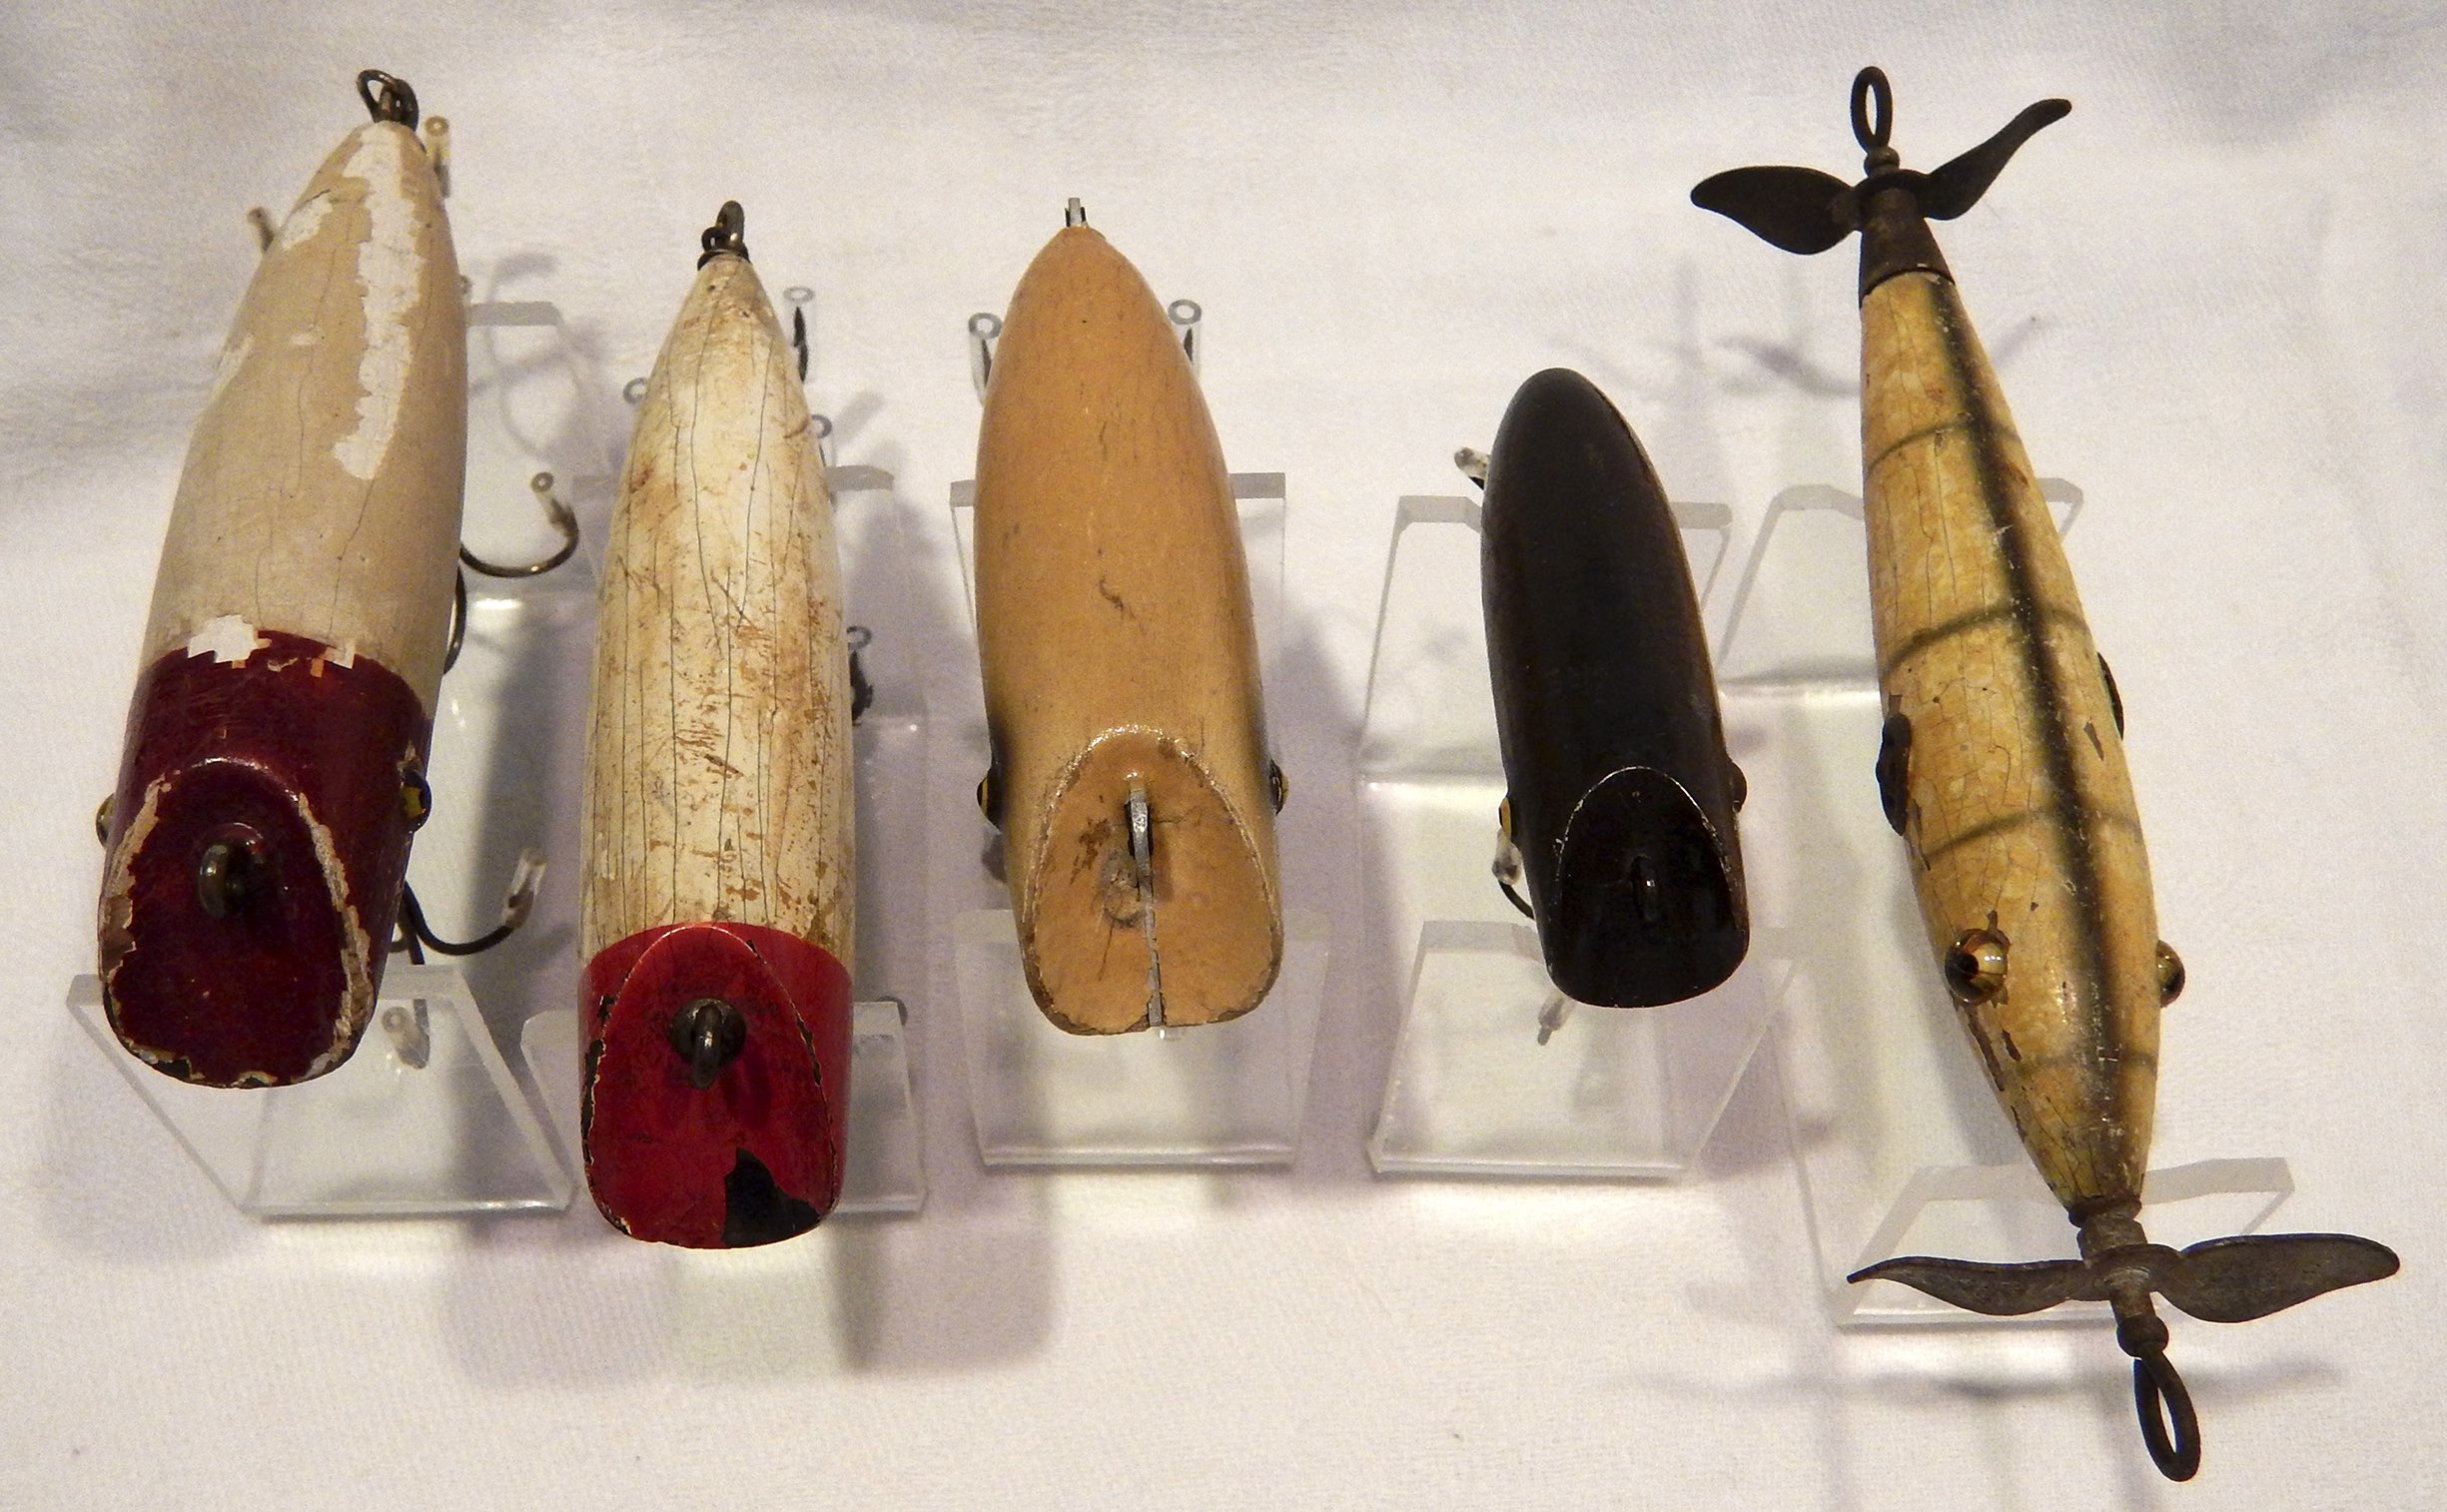 Vintage Group of South Bend Lures